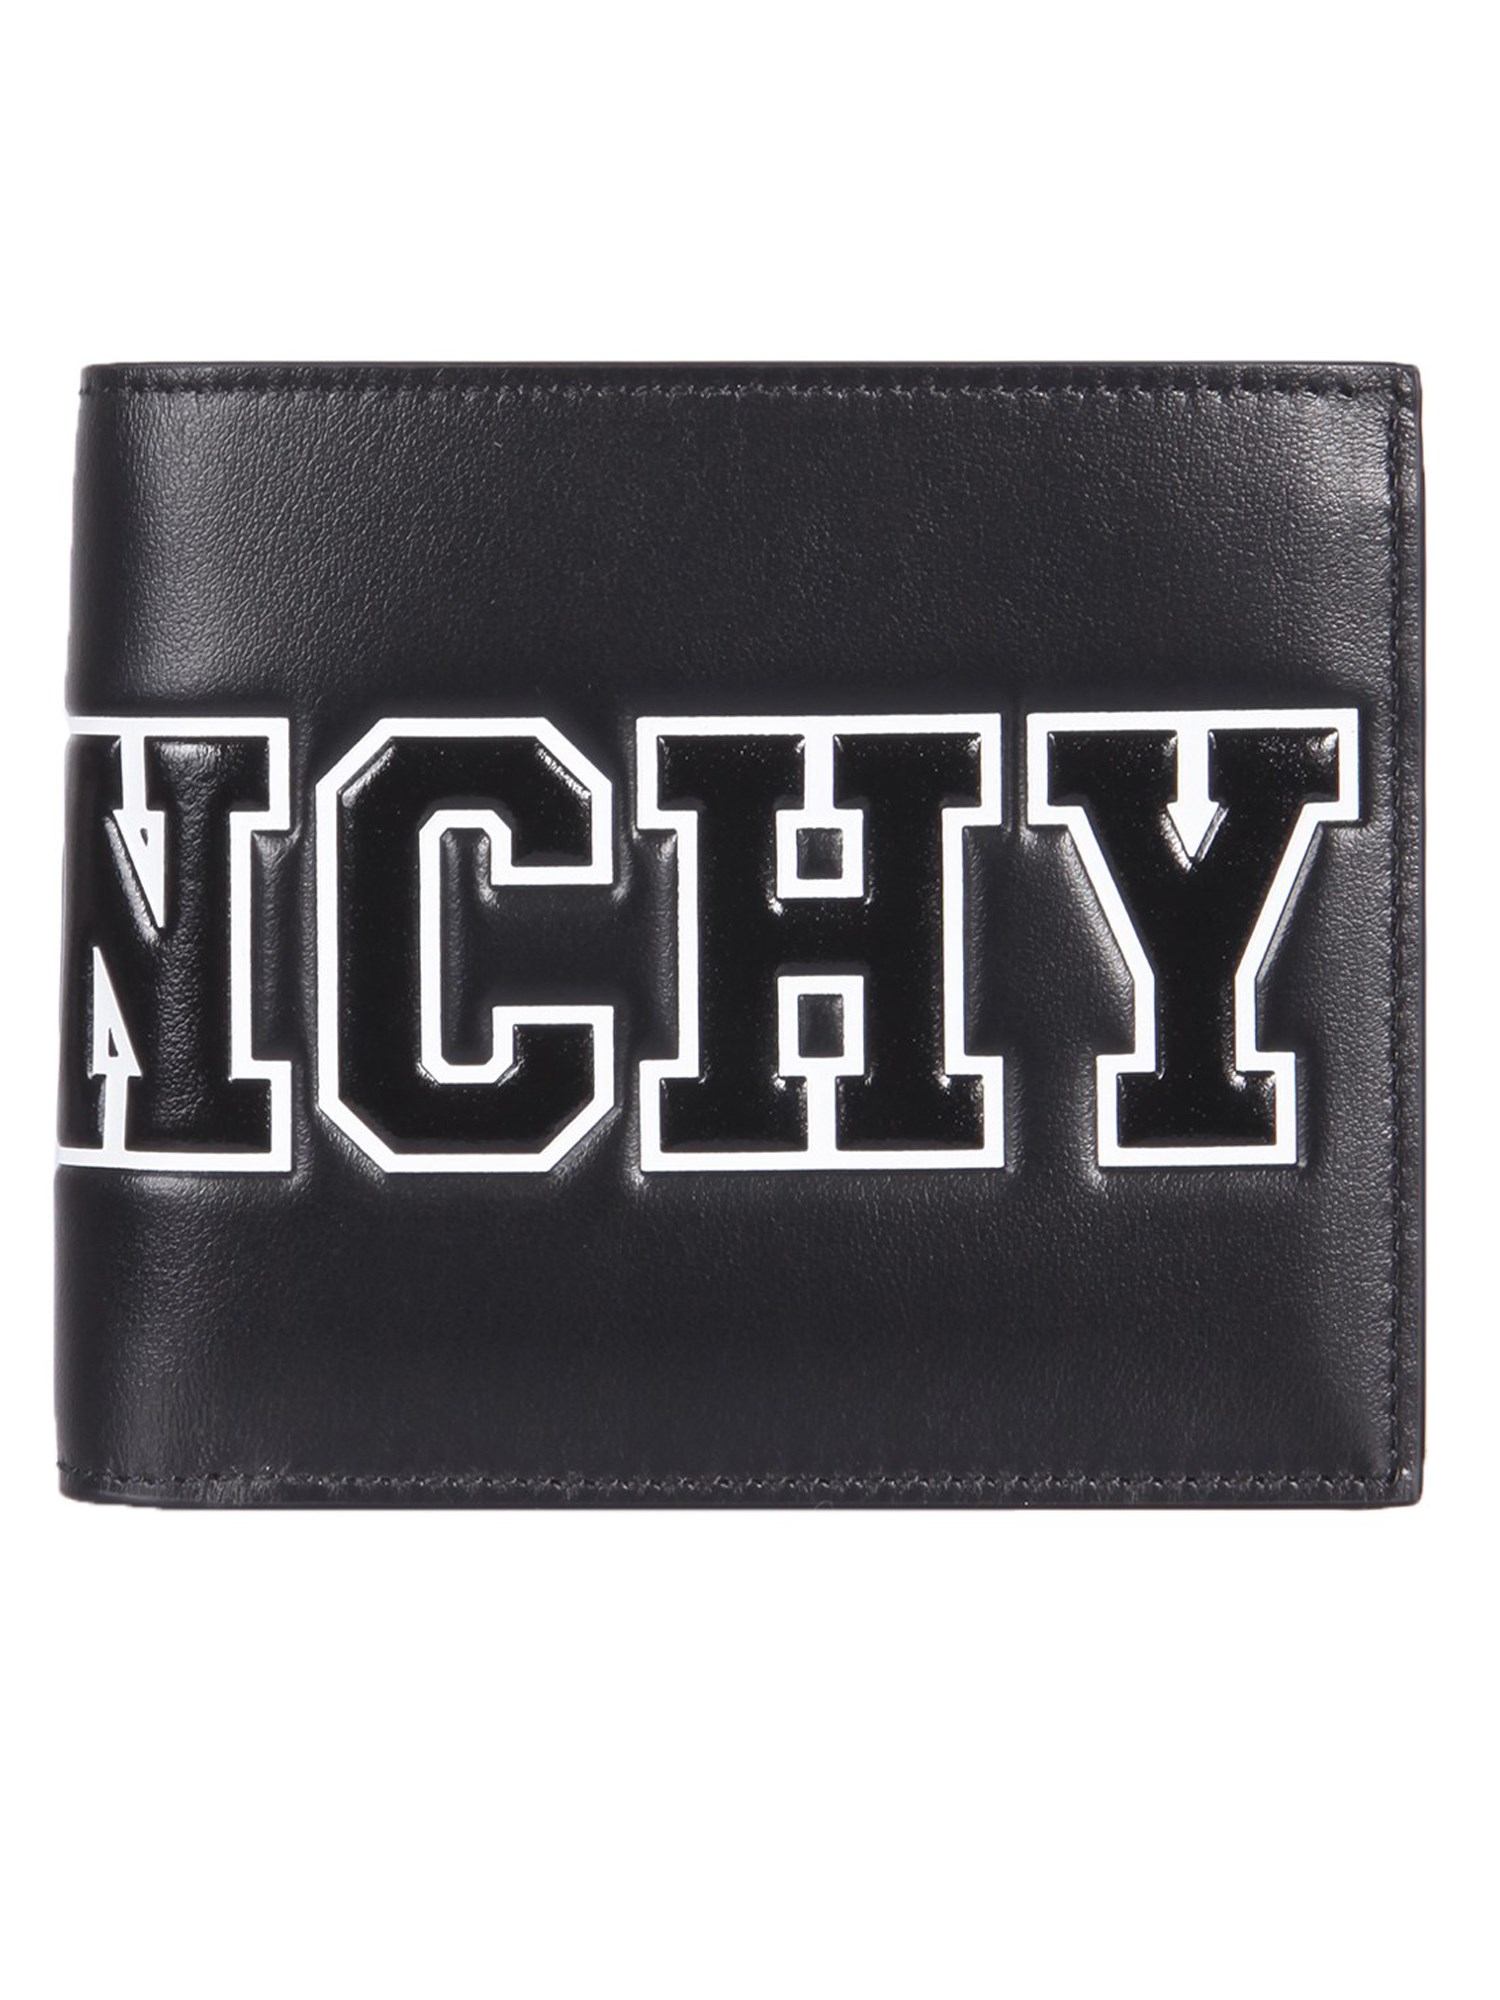 givenchy leather billfold wallet